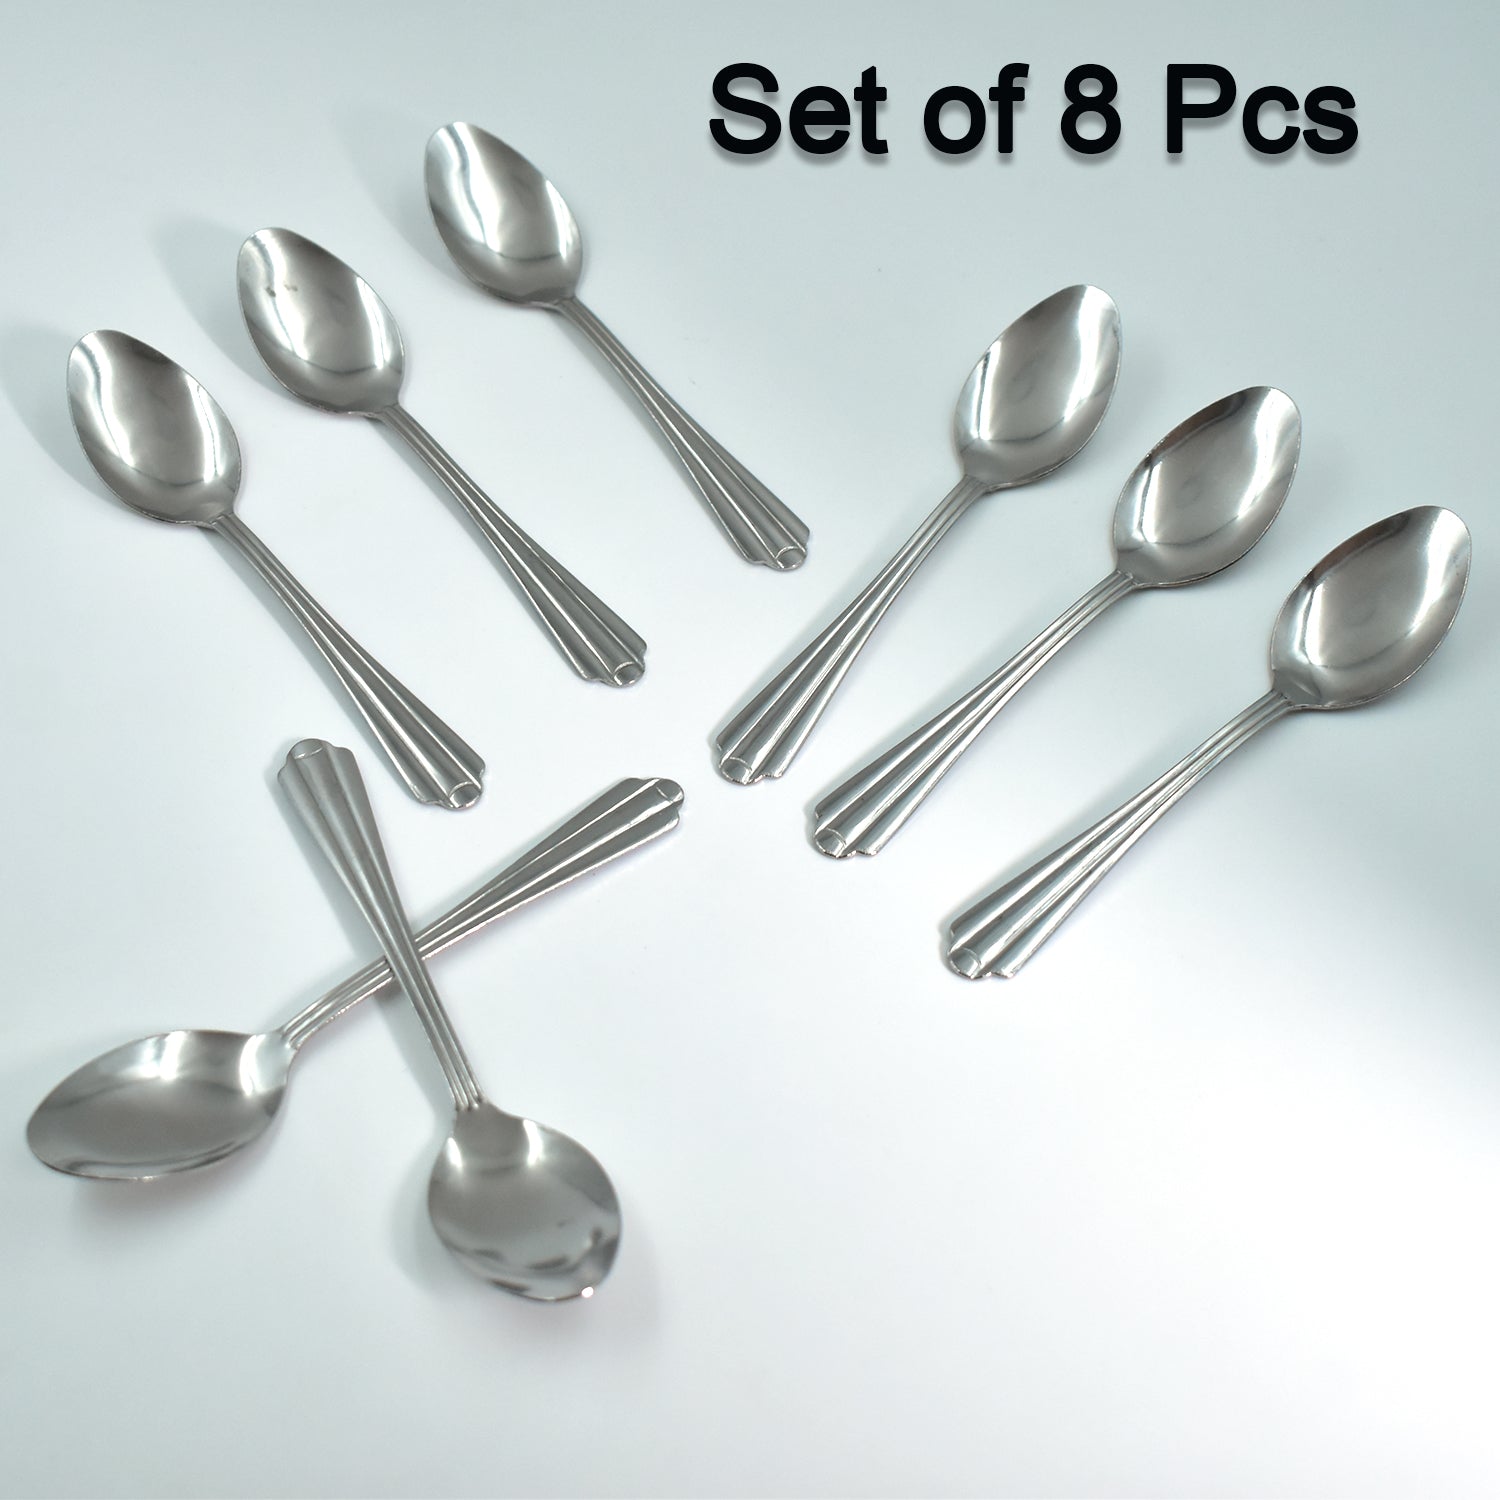 2779 (set of 8pc) small tea spoon Set for Tea, Coffee, Sugar & Spices, Small Spoons Dukandaily